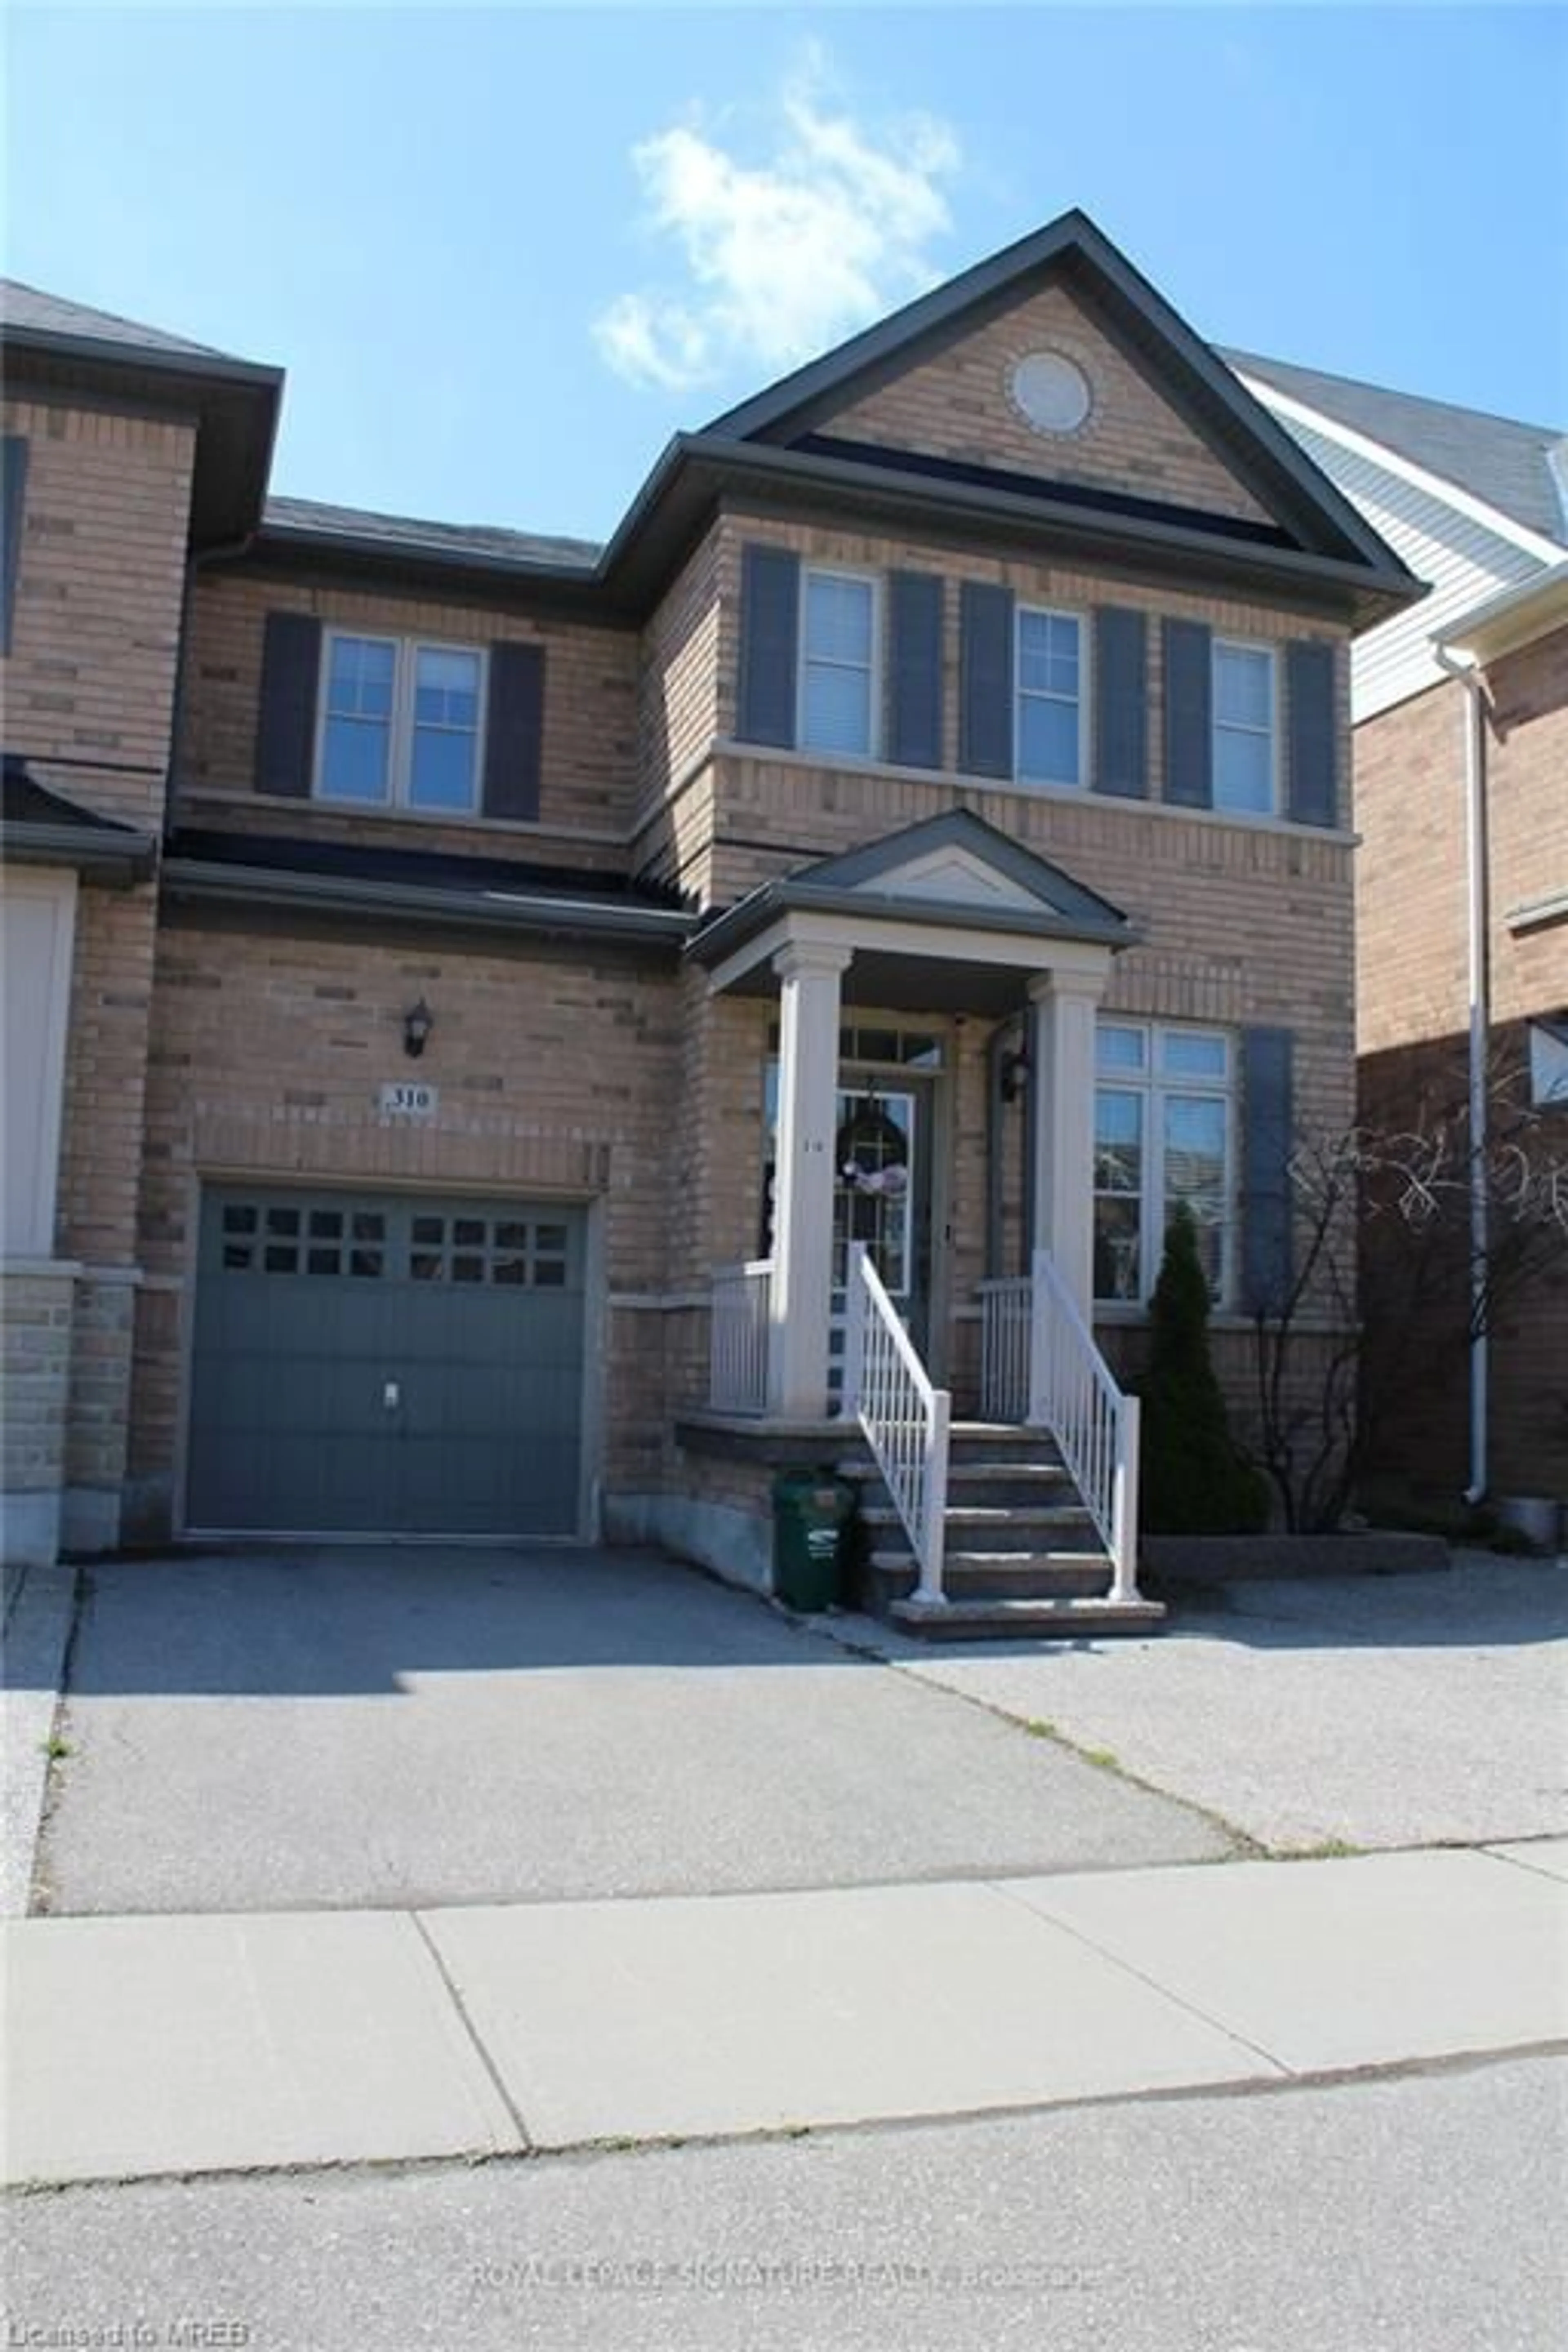 Home with brick exterior material for 310 Scott Blvd, Milton Ontario L9T 6Z9